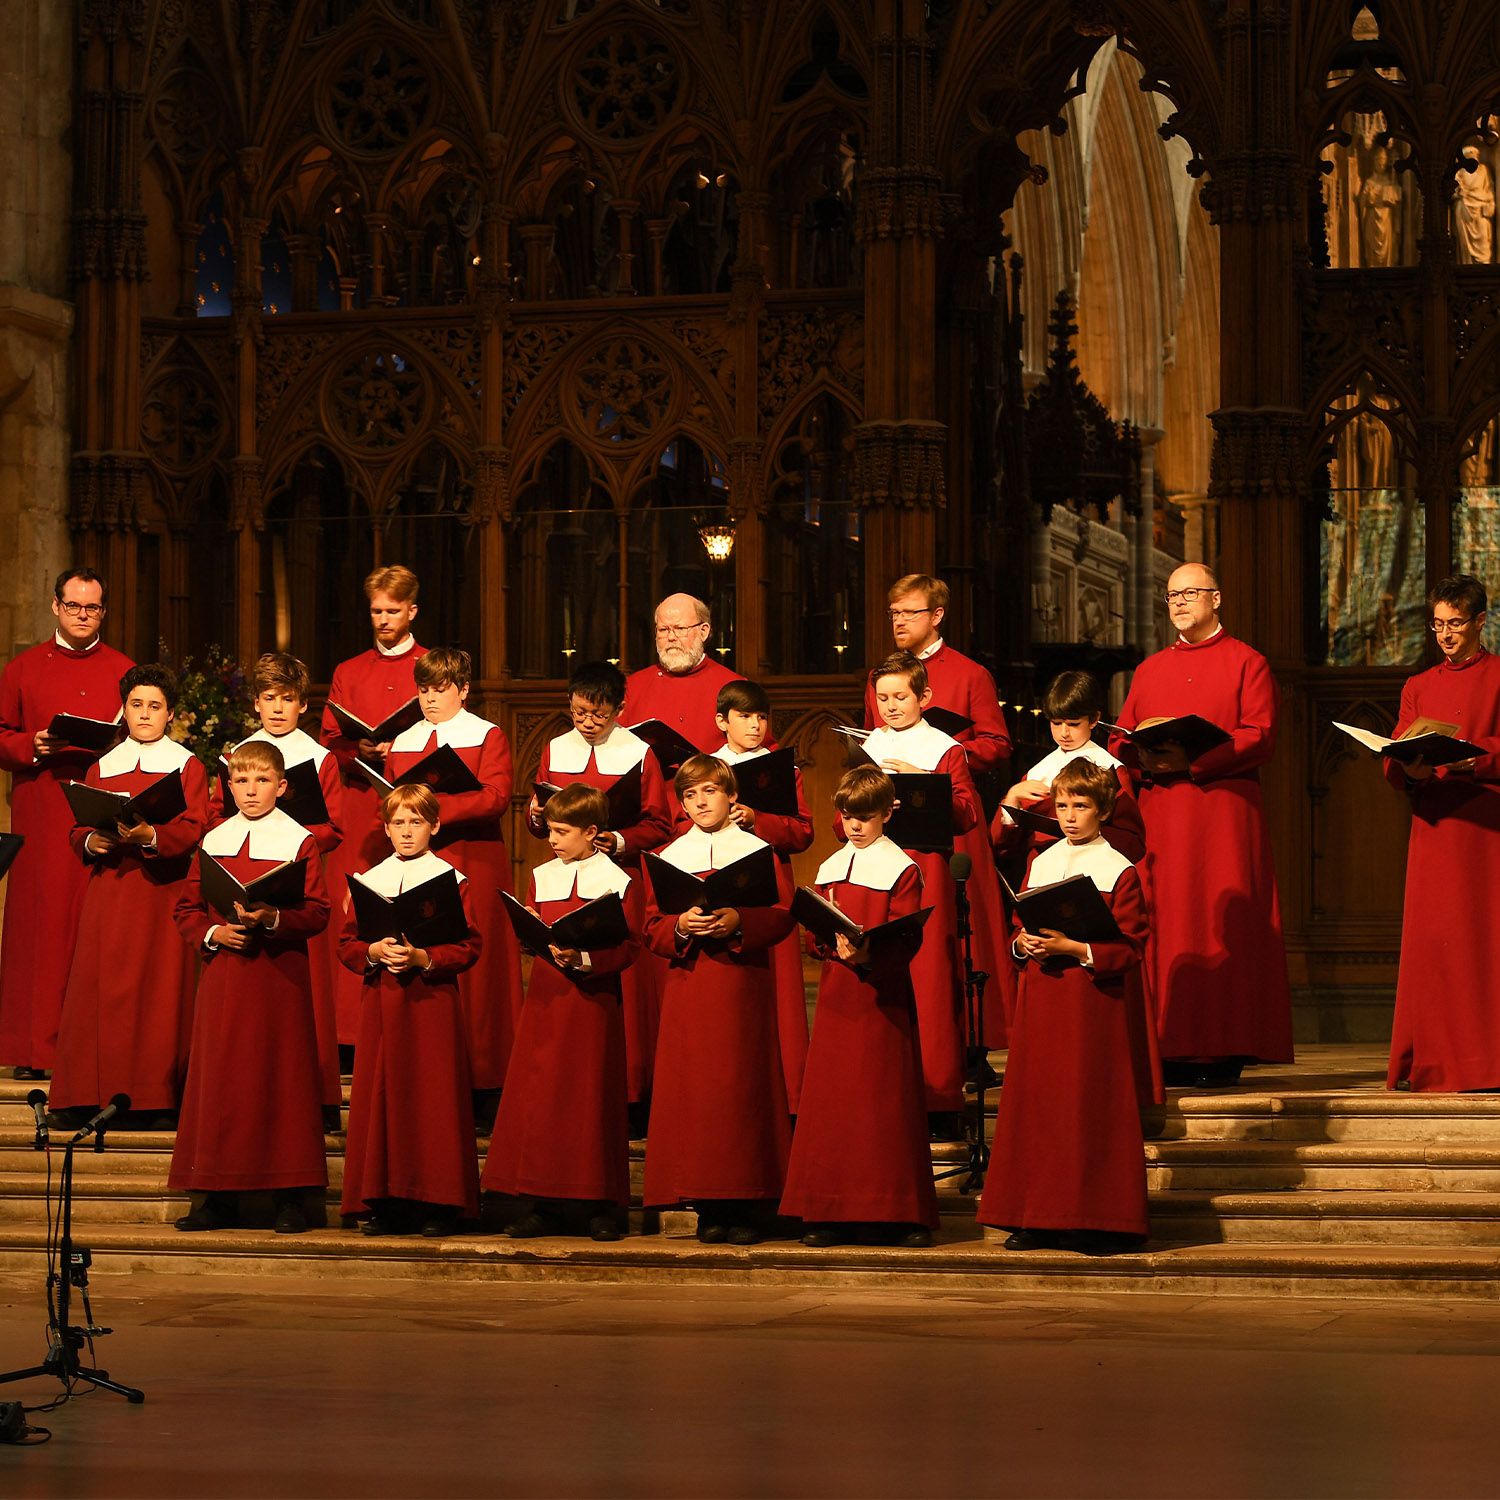 The Choir stand in front of a wooden screen at Winchester Cathedral, wearing red cassocks